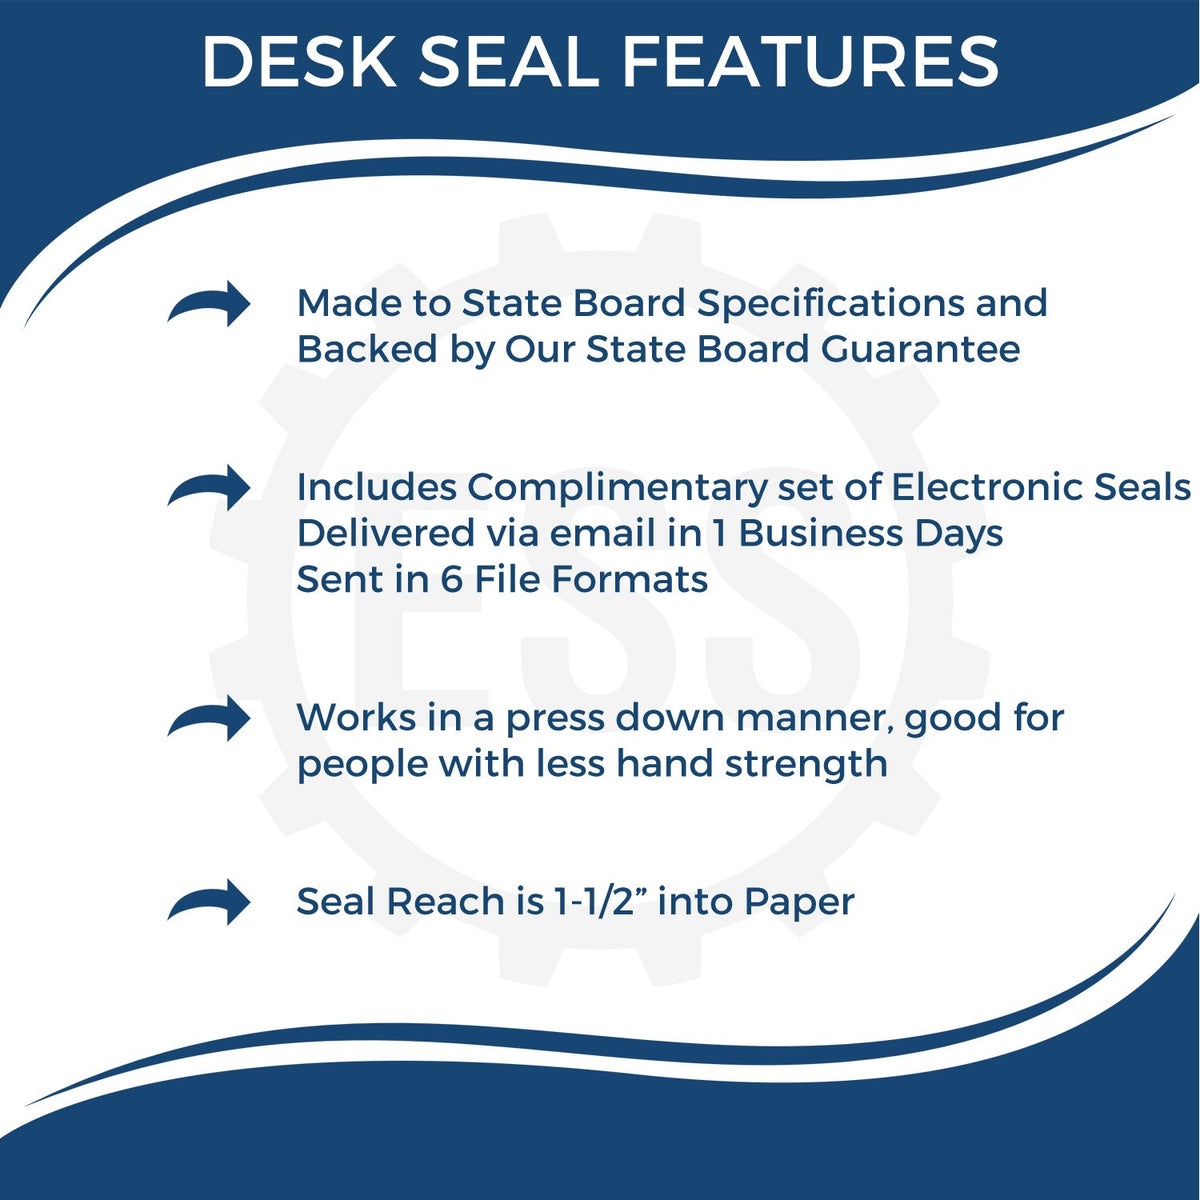 A picture of an infographic highlighting the selling points for the Maryland Desk Surveyor Seal Embosser